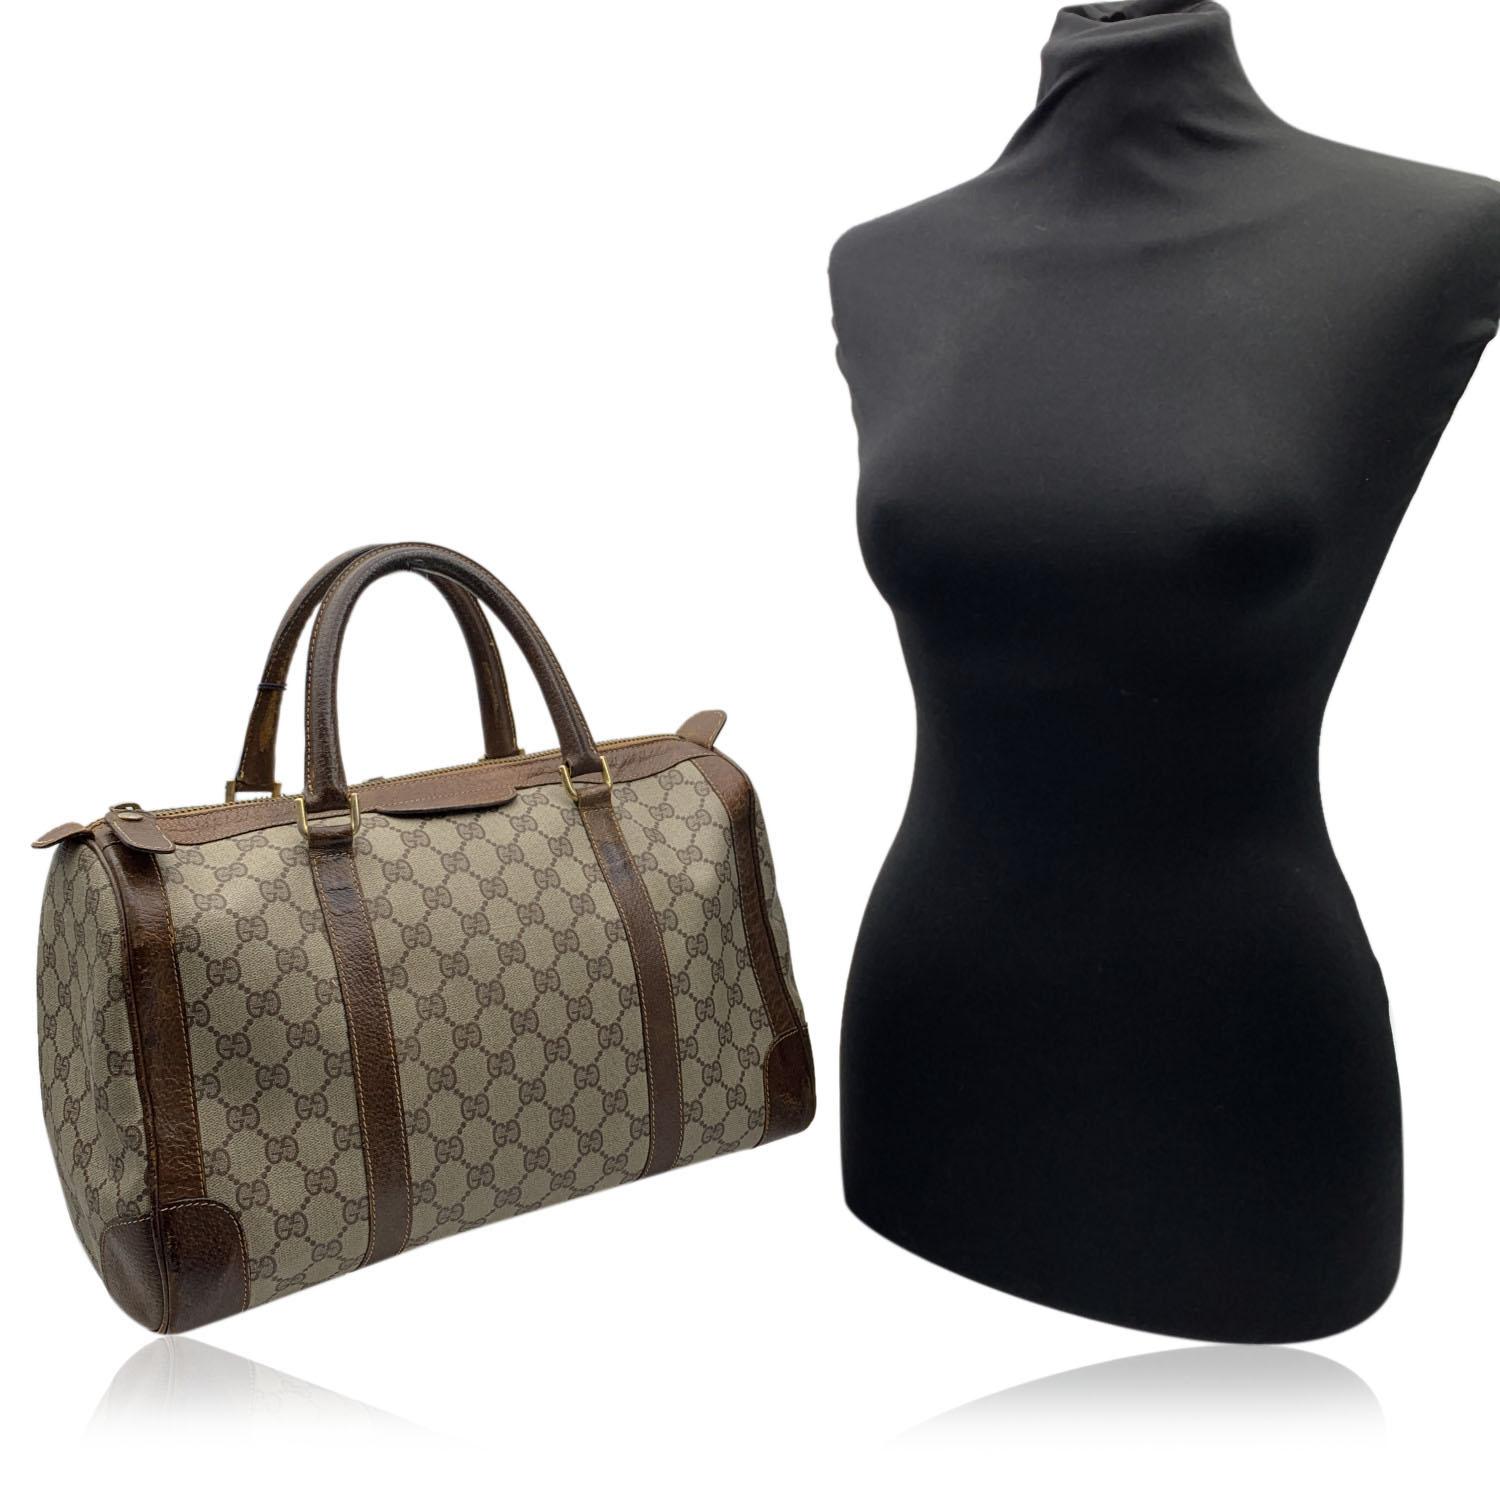 Vintage Gucci Monogram Boston Bag. Beige monogram canvas. Genuine leather trim and handles.Double top handles. Upper zipper closure. 'Made in Italy by GUCCI' tag inside.

Details

MATERIAL: Canvas

COLOR: Beige

MODEL: Monogram Boston Bag

GENDER: